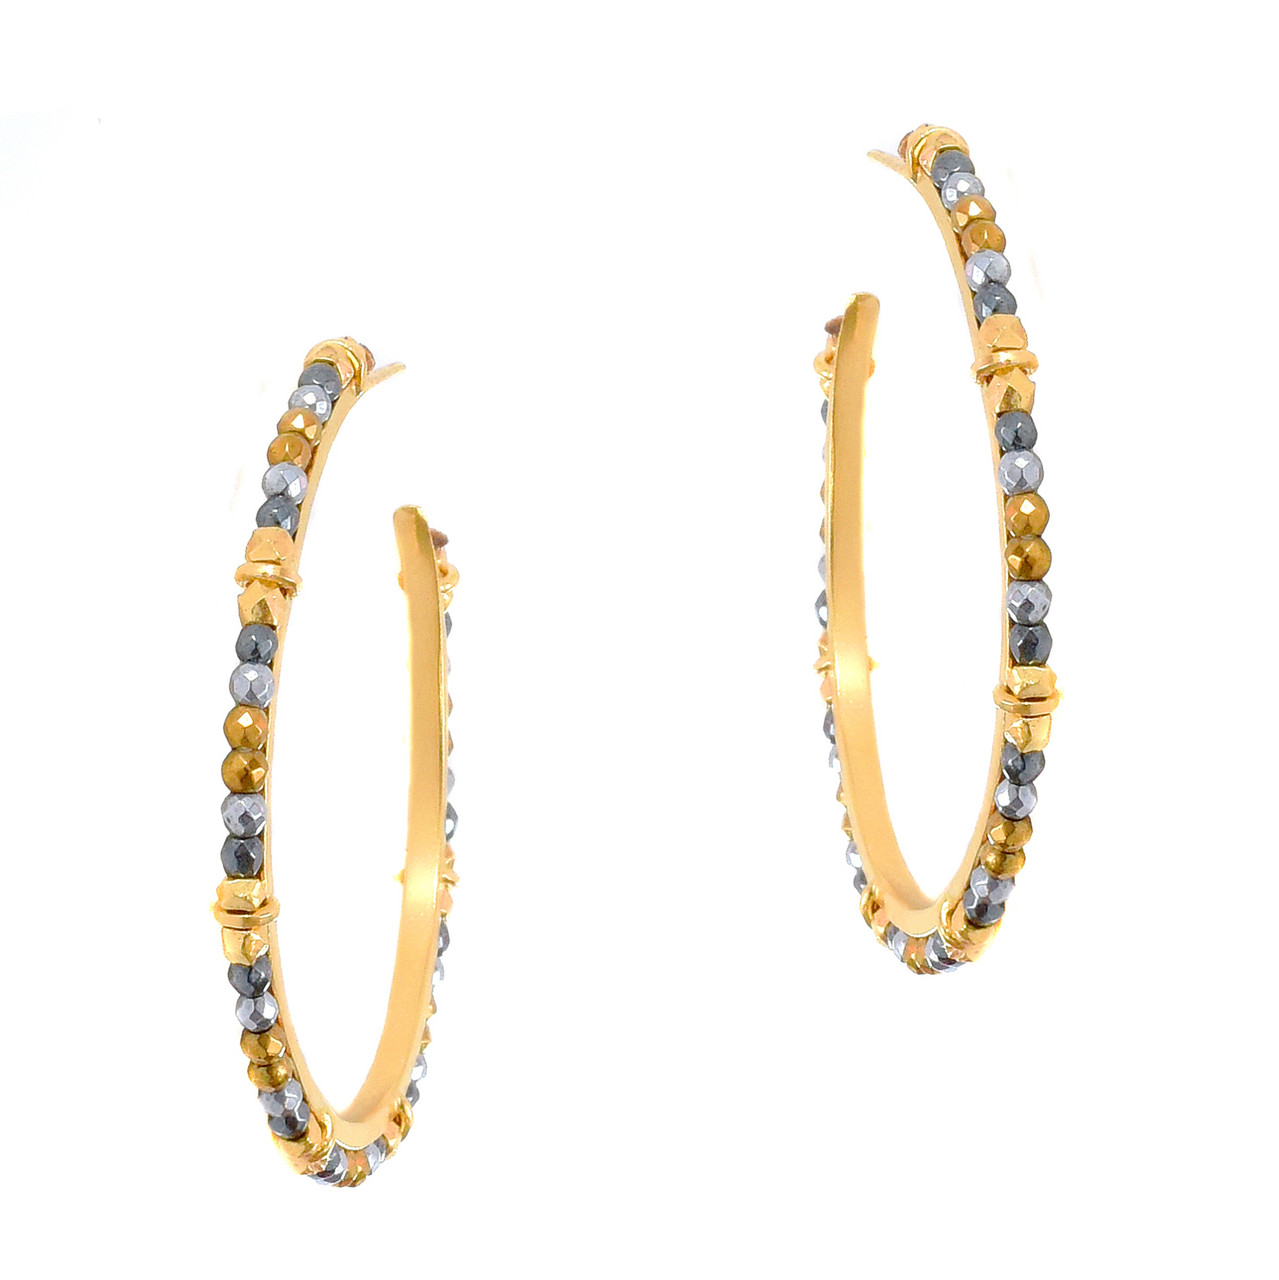 Smarties Gold Plated Beaded Hoops with Hematite, Mary Gaitani, tomfoolery